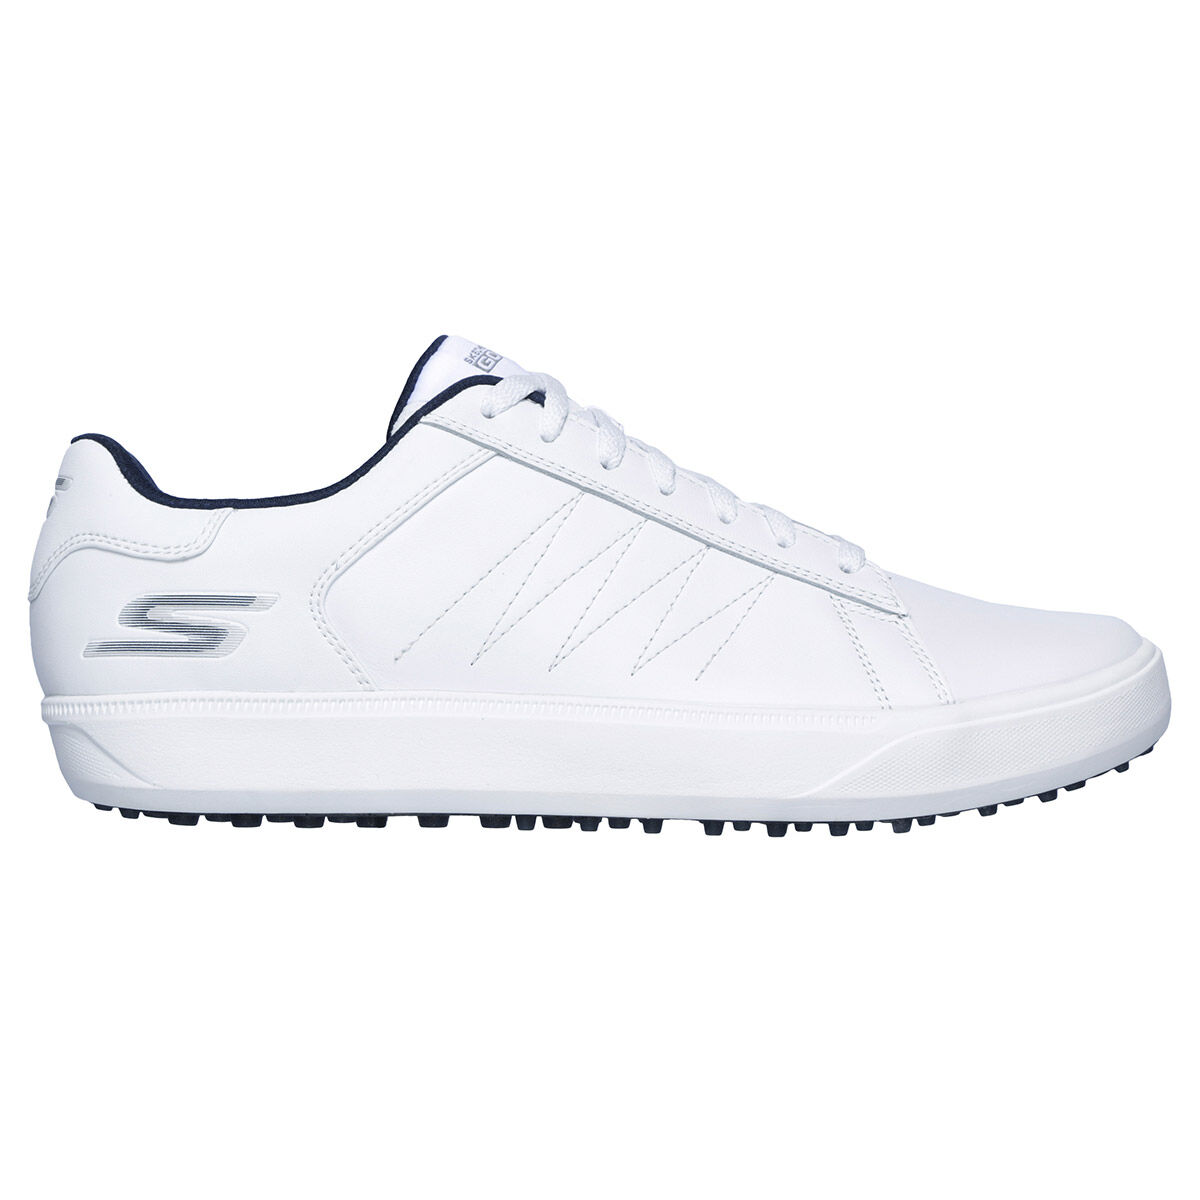 Skechers Go Golf Drive 4 Shoes from 